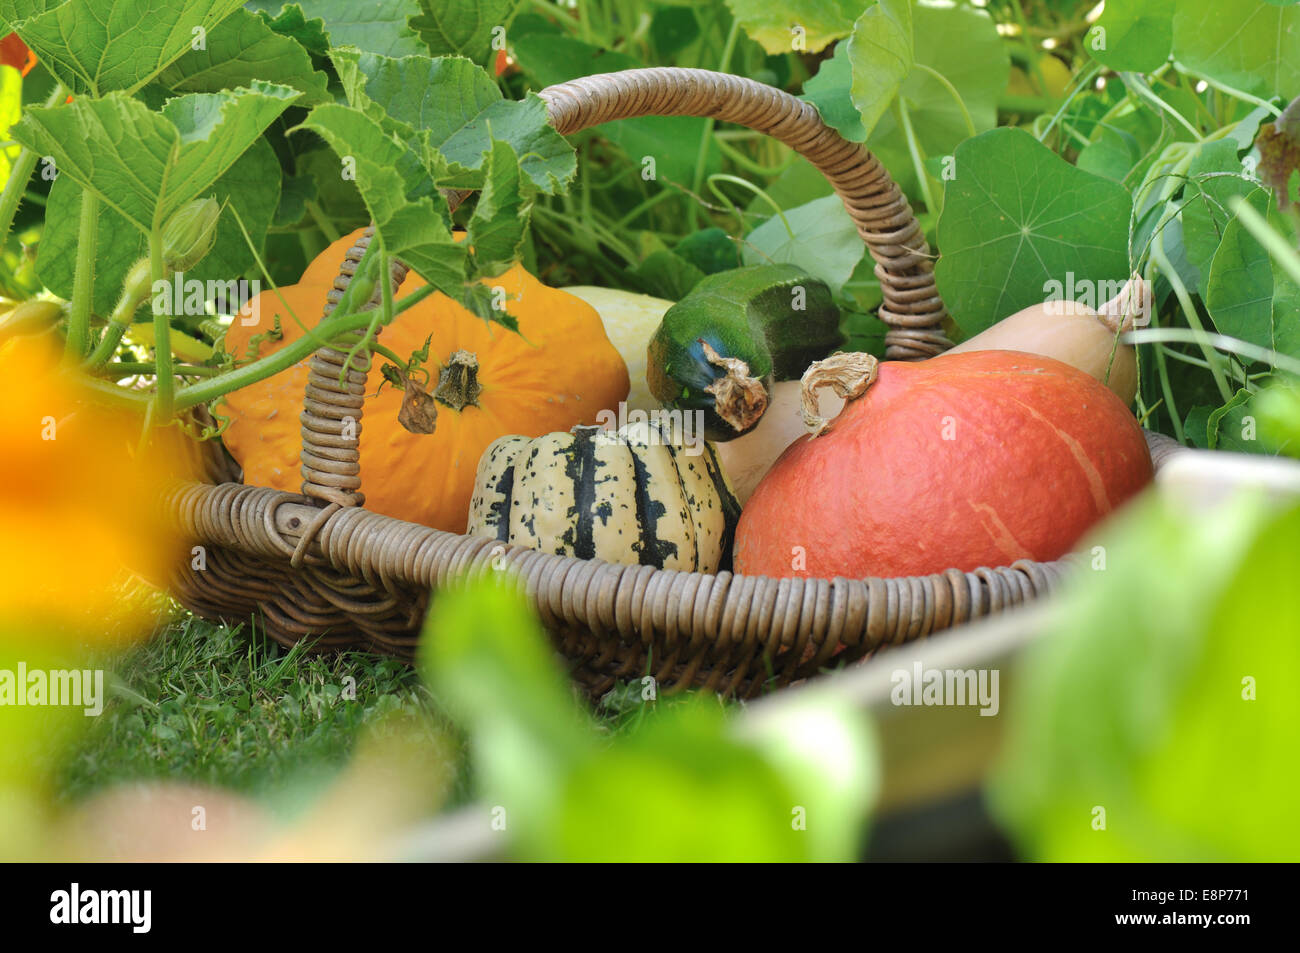 basket of different  squash in the garden among foliage Stock Photo